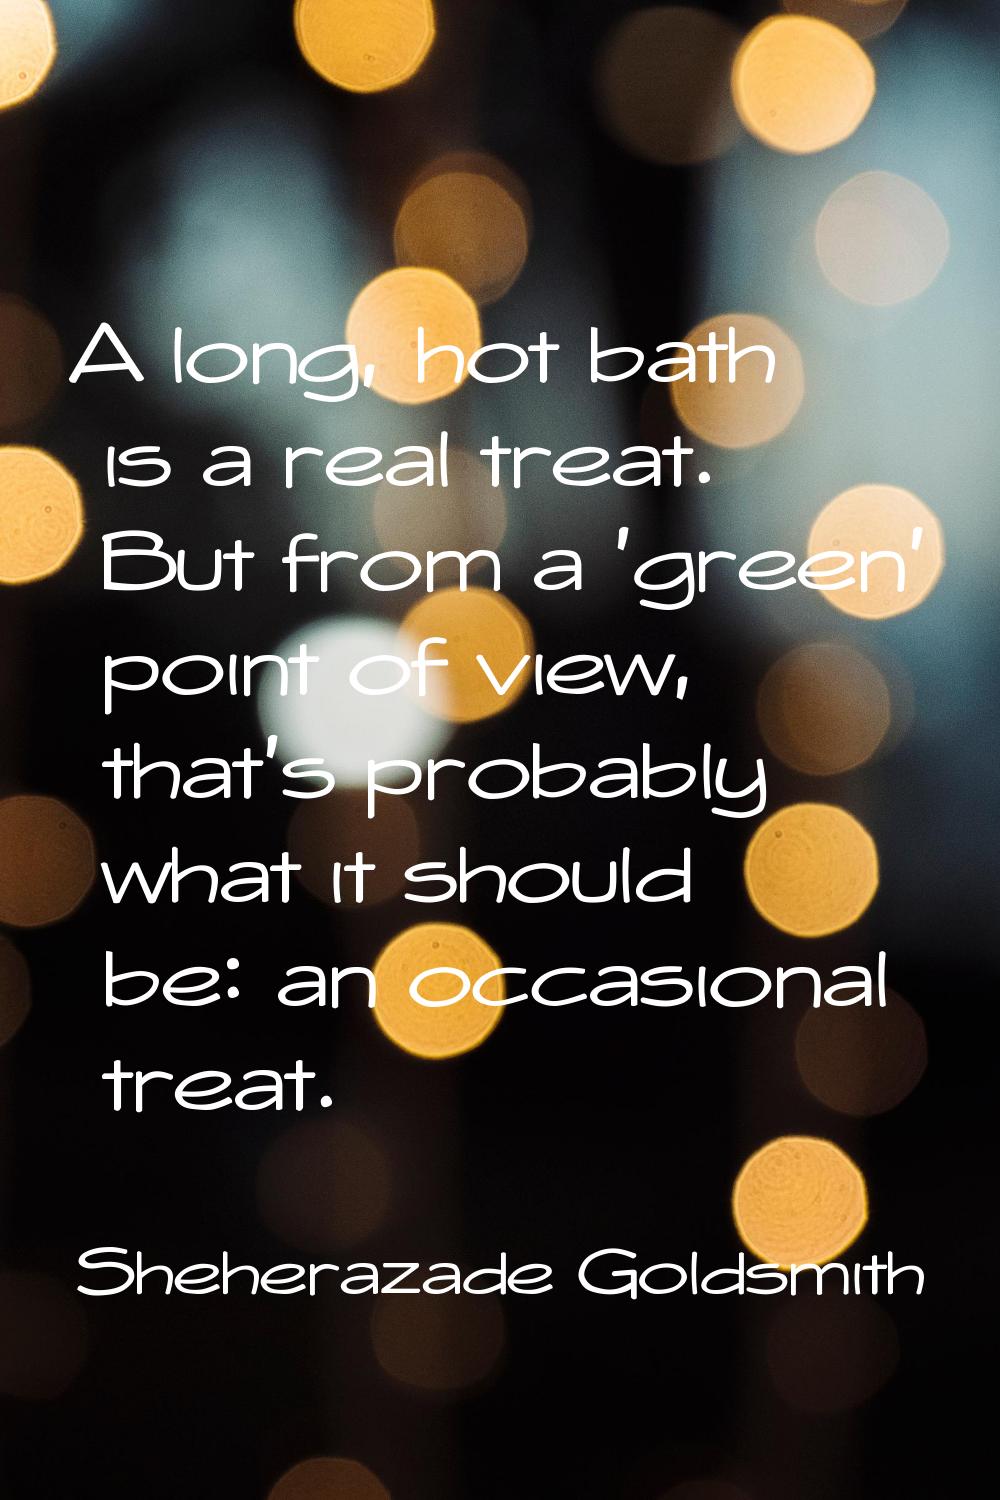 A long, hot bath is a real treat. But from a 'green' point of view, that's probably what it should 